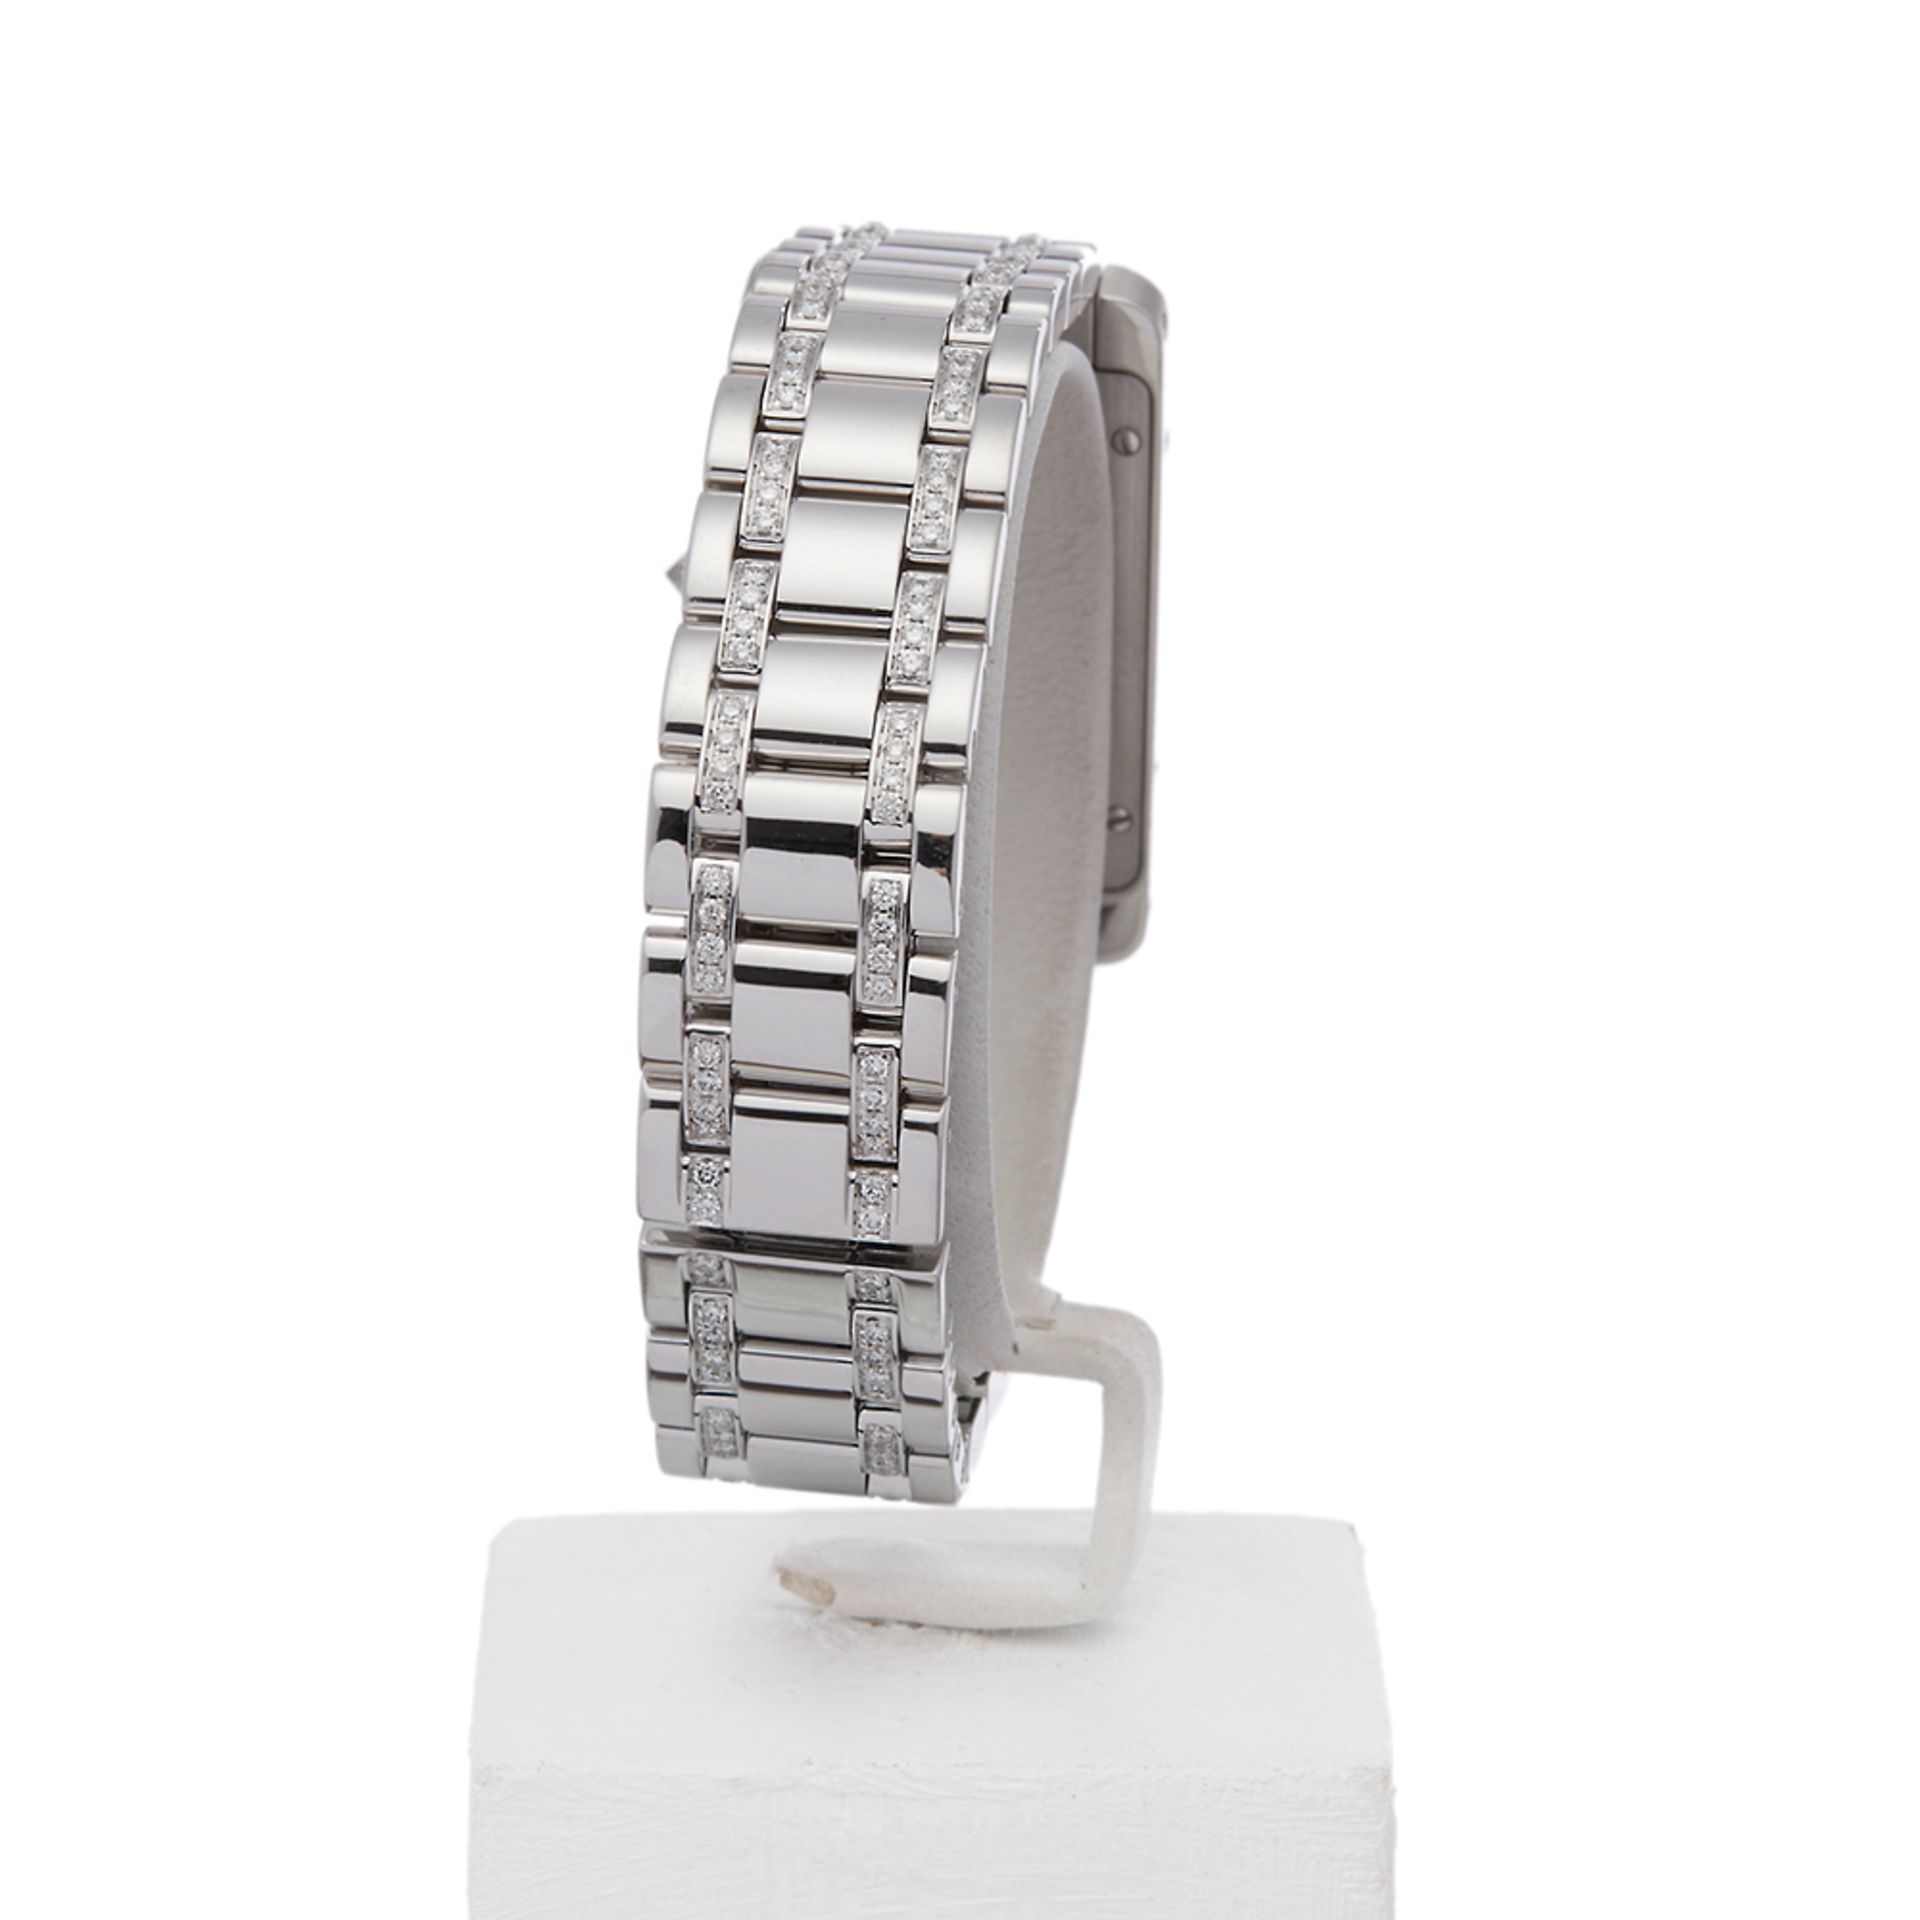 Cartier Tank Americaine 18k White Gold - 2489 - Image 7 of 8